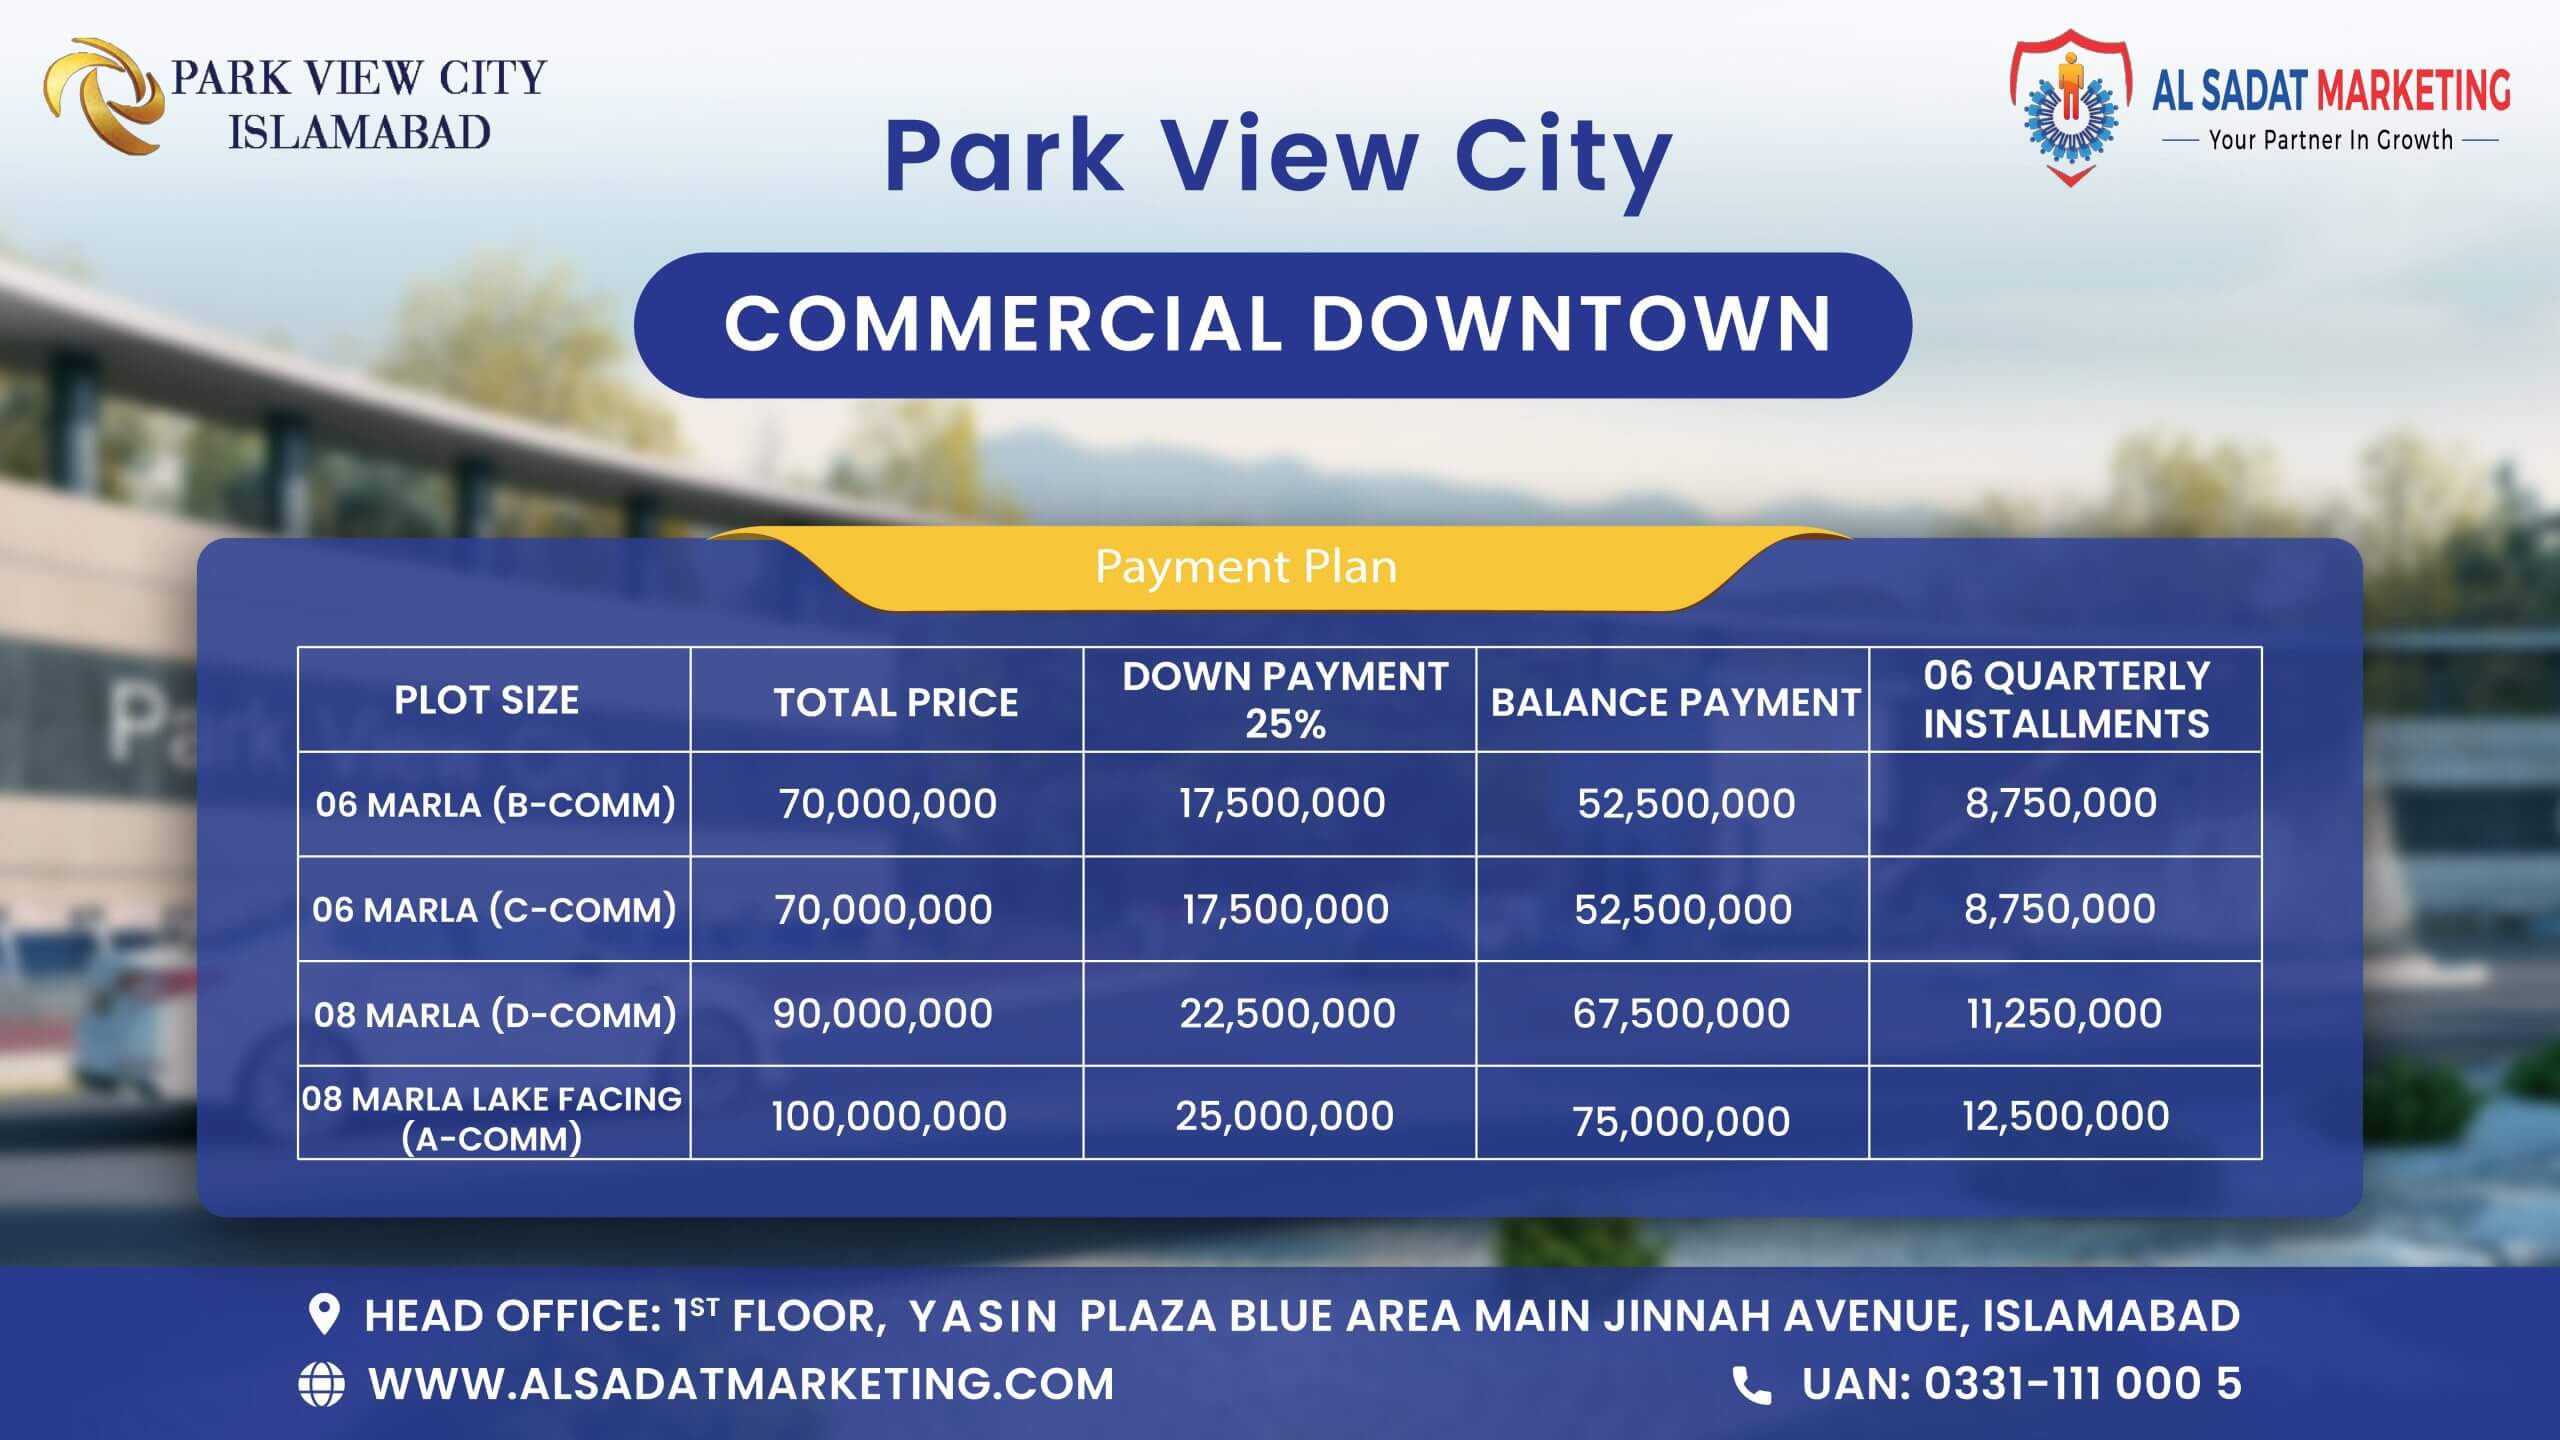 park view city islamabad commercial downtown payment plan - park view city islamabad commercial down town payment plan - park view city commercial downtown payment plan – park view city commercial down town payment plan – park view city islamabad payment plan - park view city payment plan - payment plan of park view city islamabad – payment plan of park view city – park view city islamabad – park view city – park view city housing society - park view city islamabad housing society – park view city real estate project - park view city islamabad real estate project - al sadat marketing - alsadat marketing - al-sadat marketing